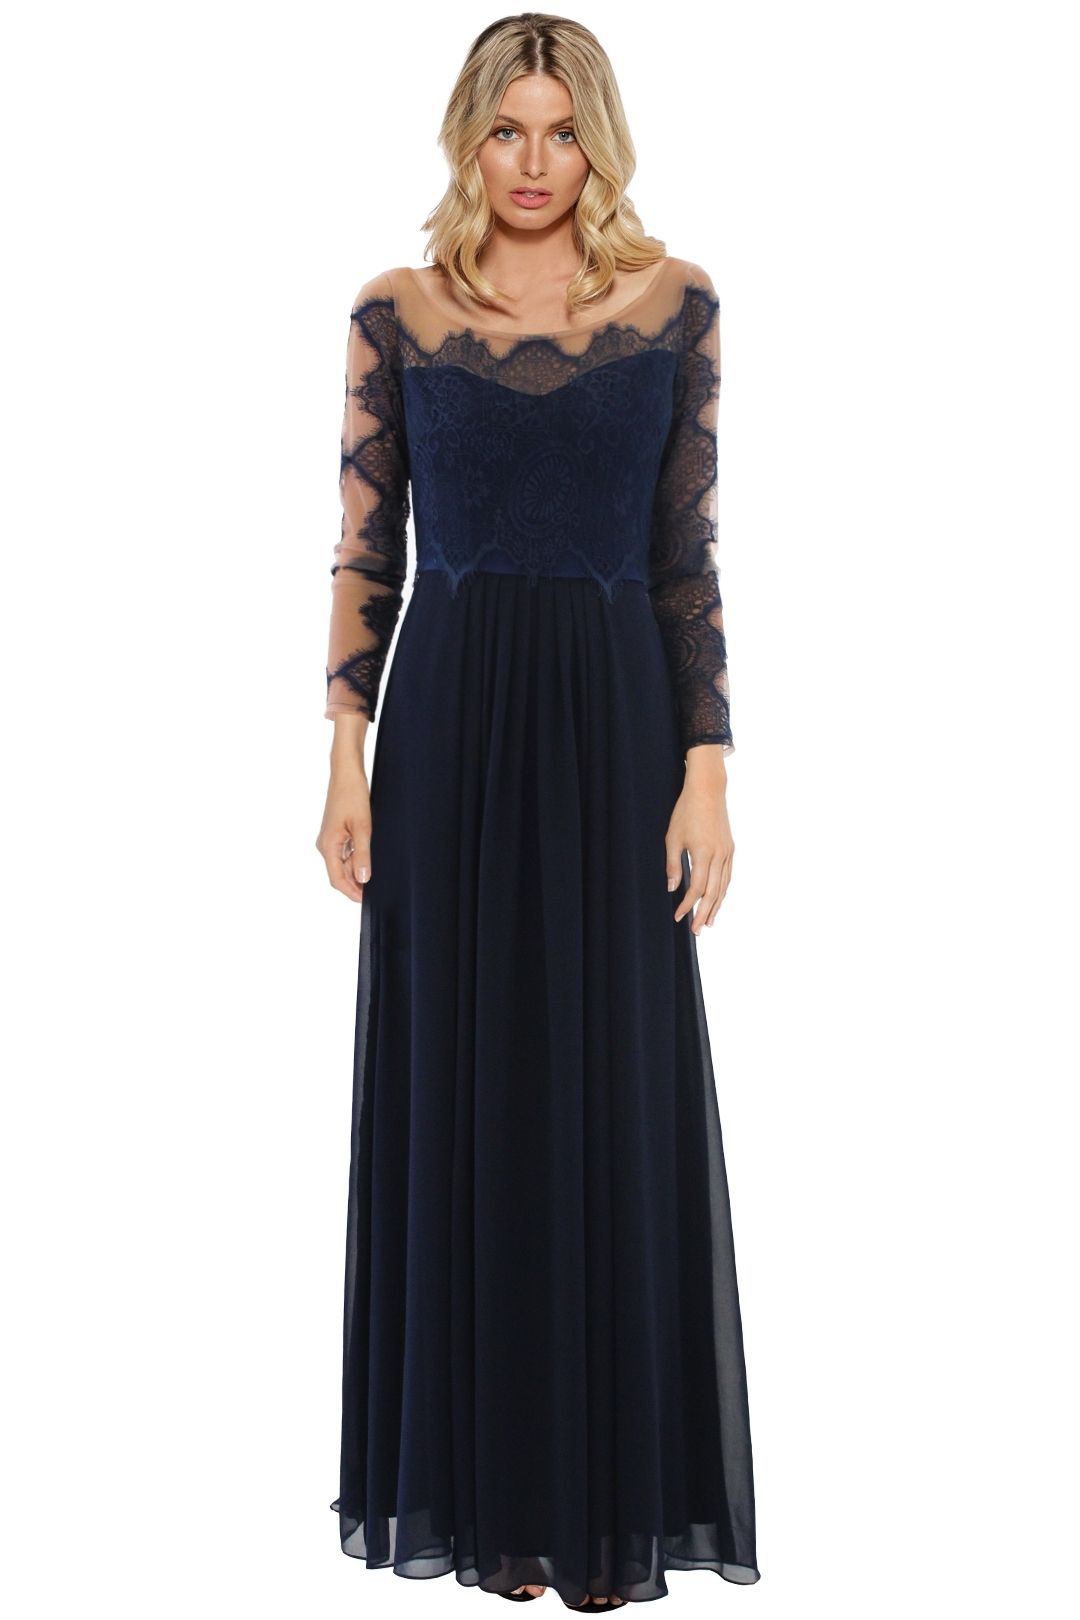 The Dress Shoppe - Gone With The Edge Gown - Navy - Front